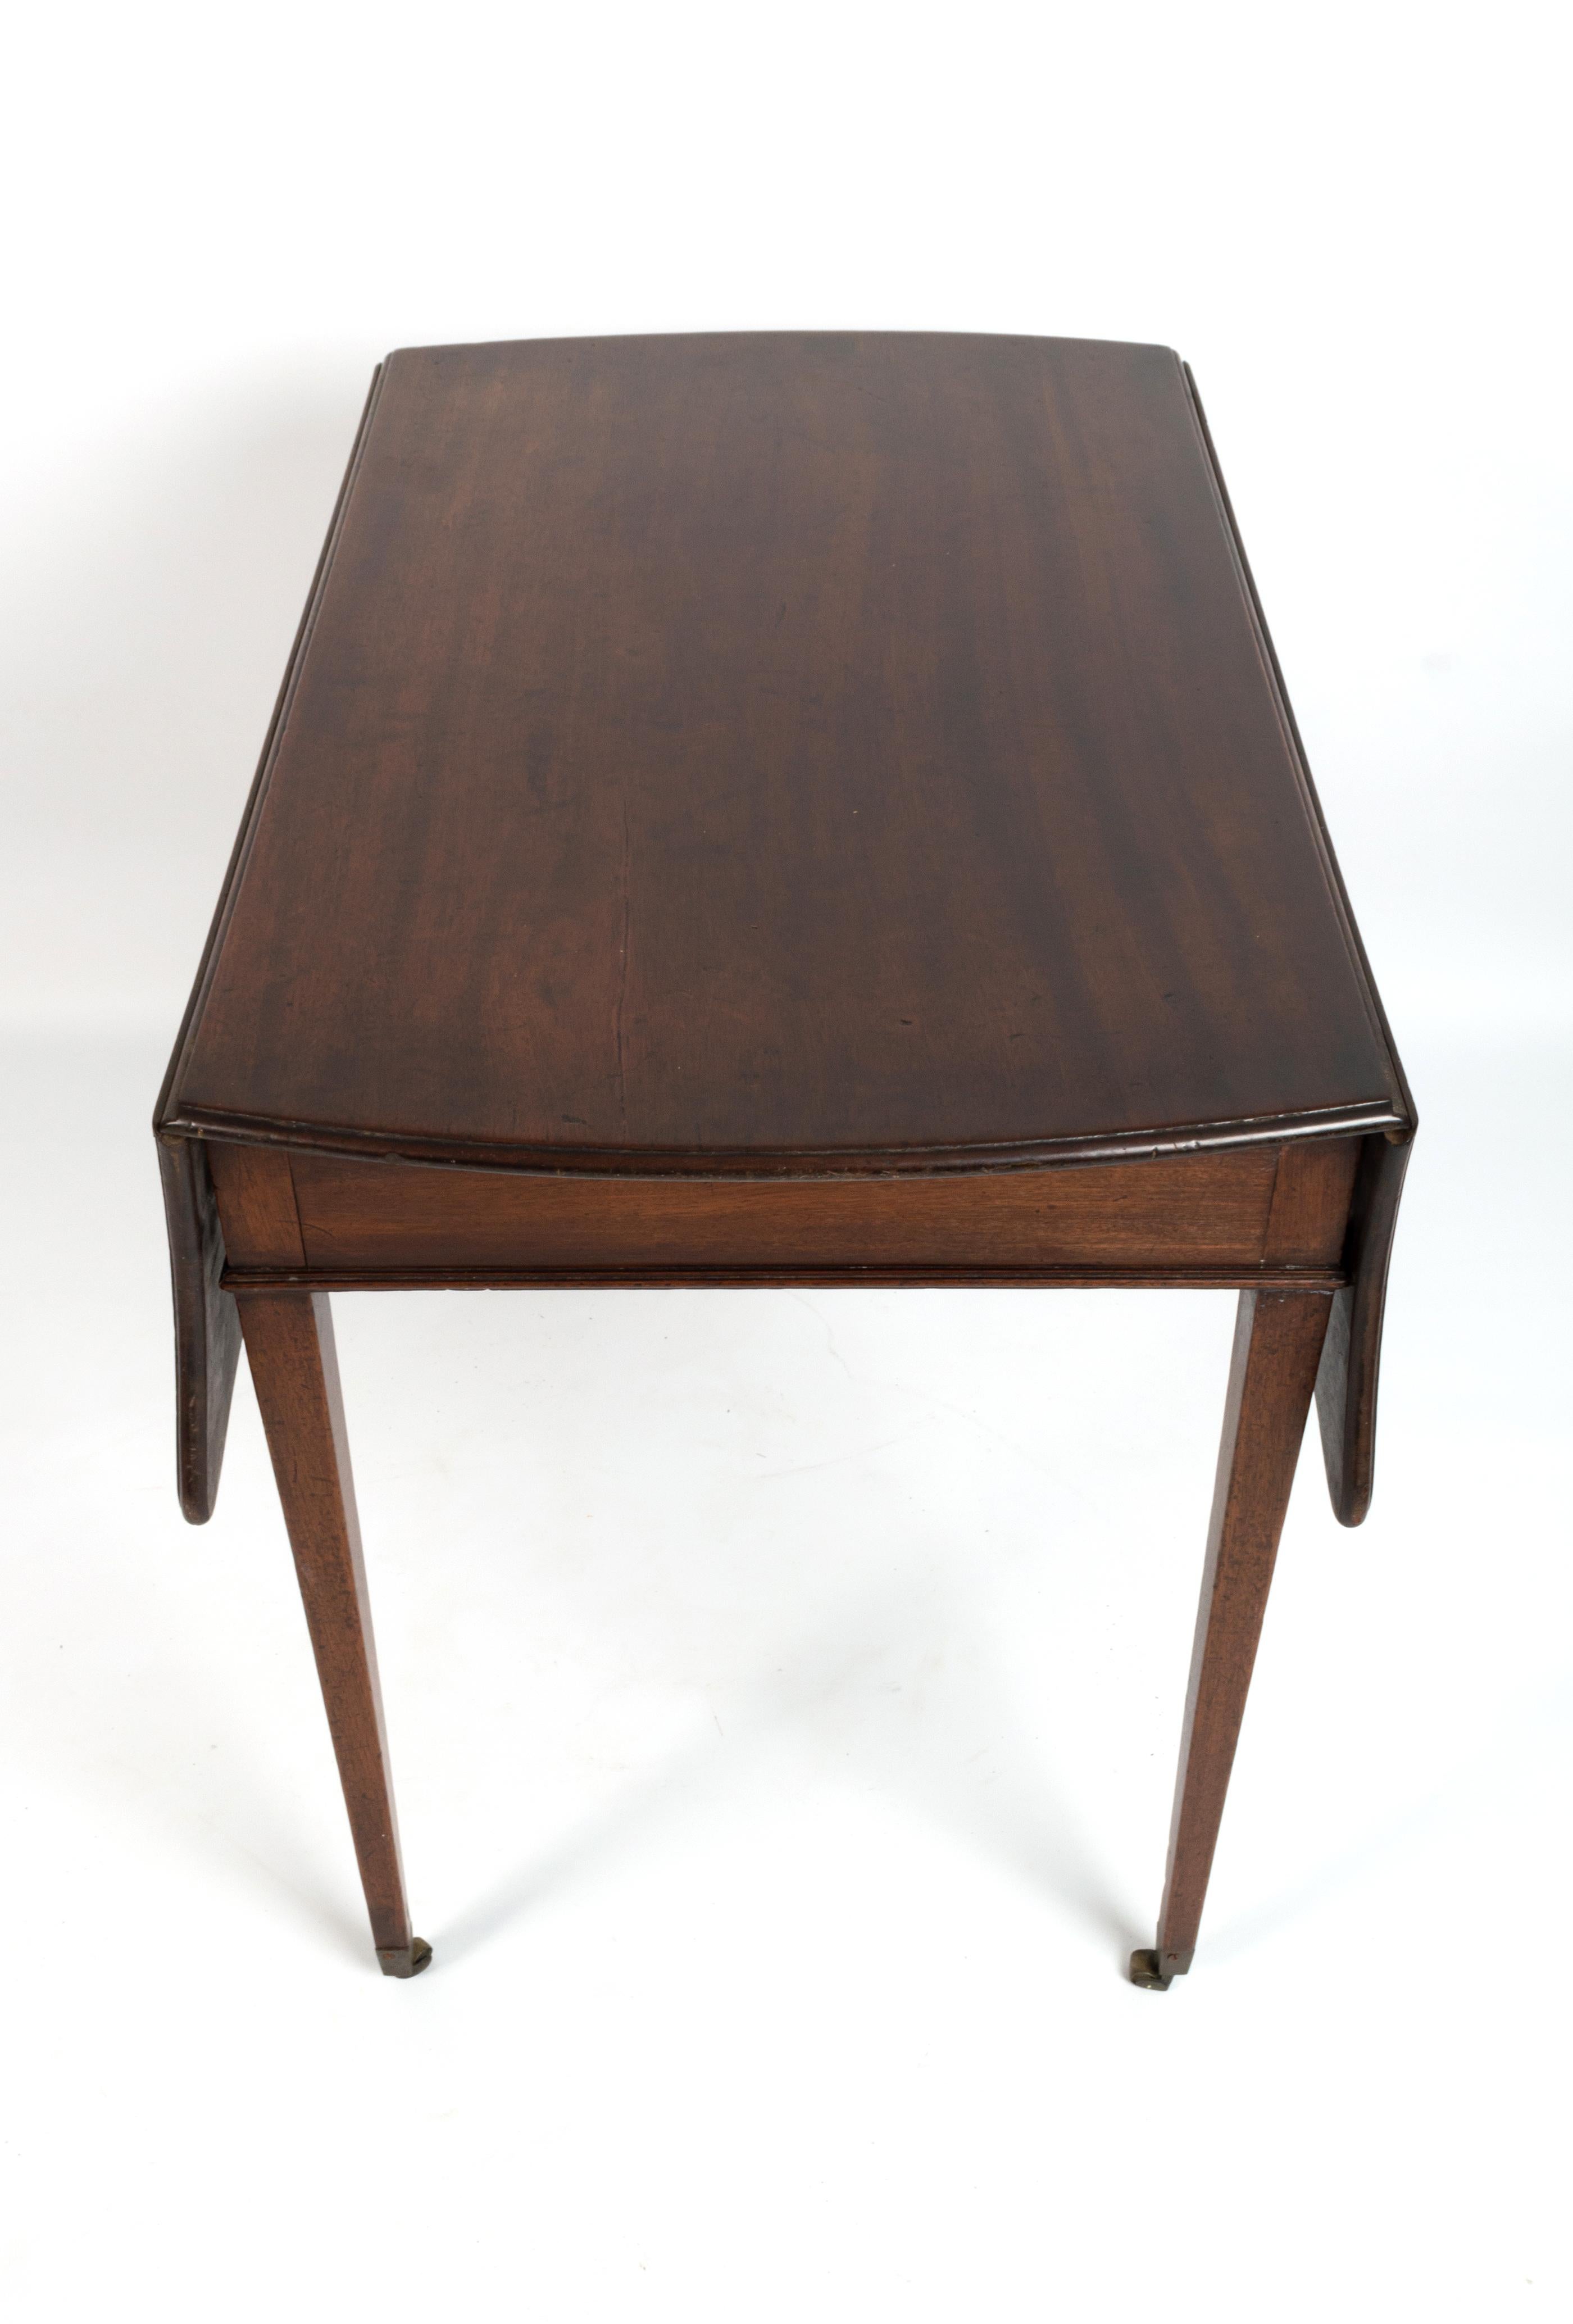 Antique English 18th Century George III Mahogany Butterfly Pembroke Table C.1780 For Sale 3